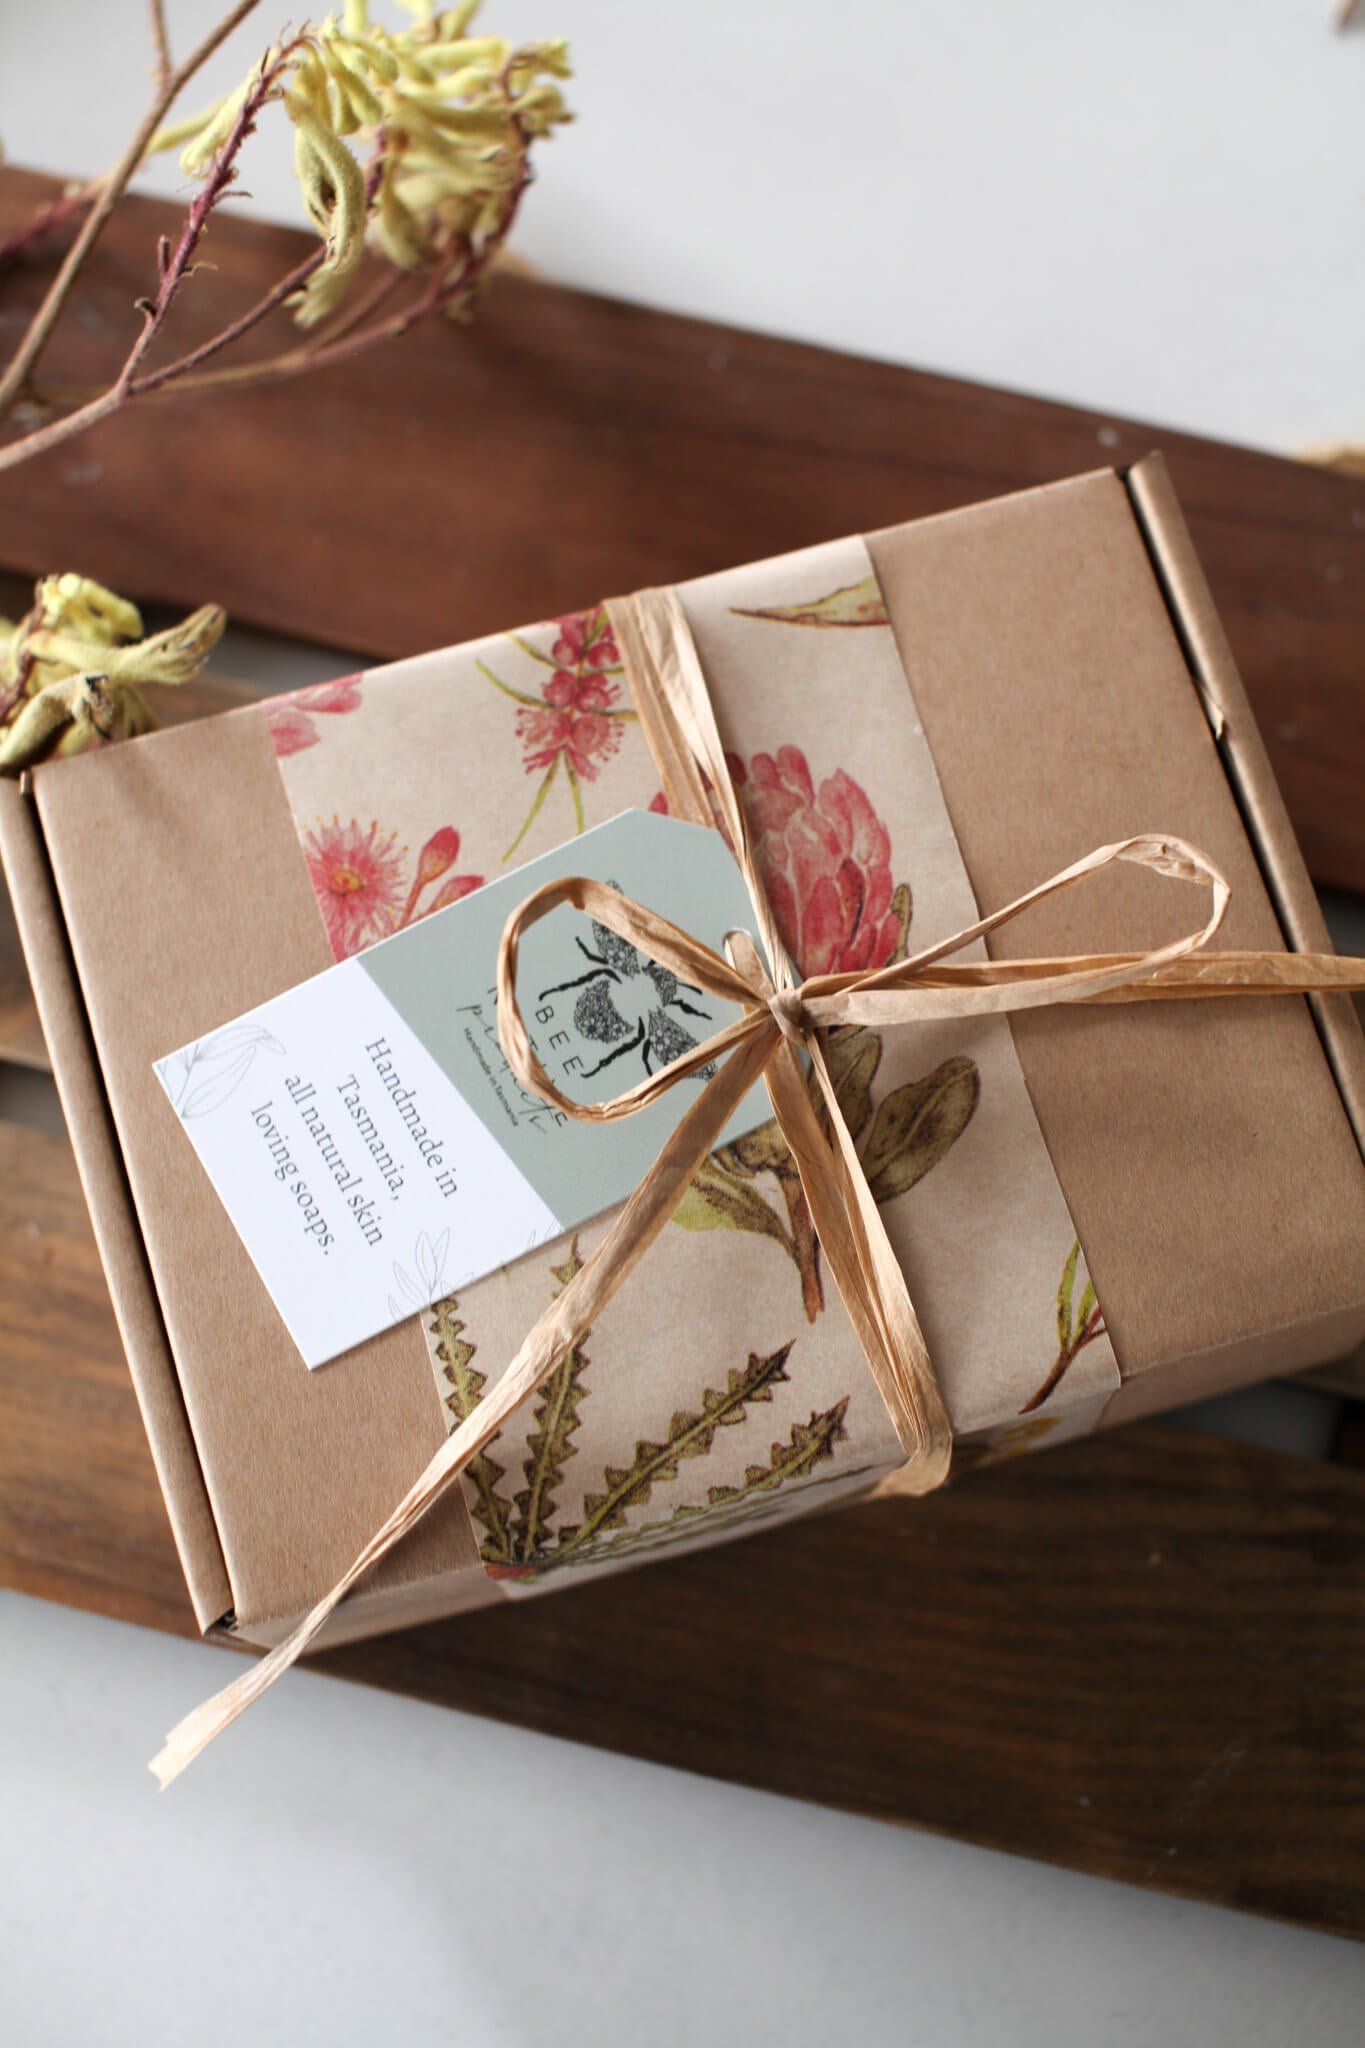 The essentials gift box - Bee native products